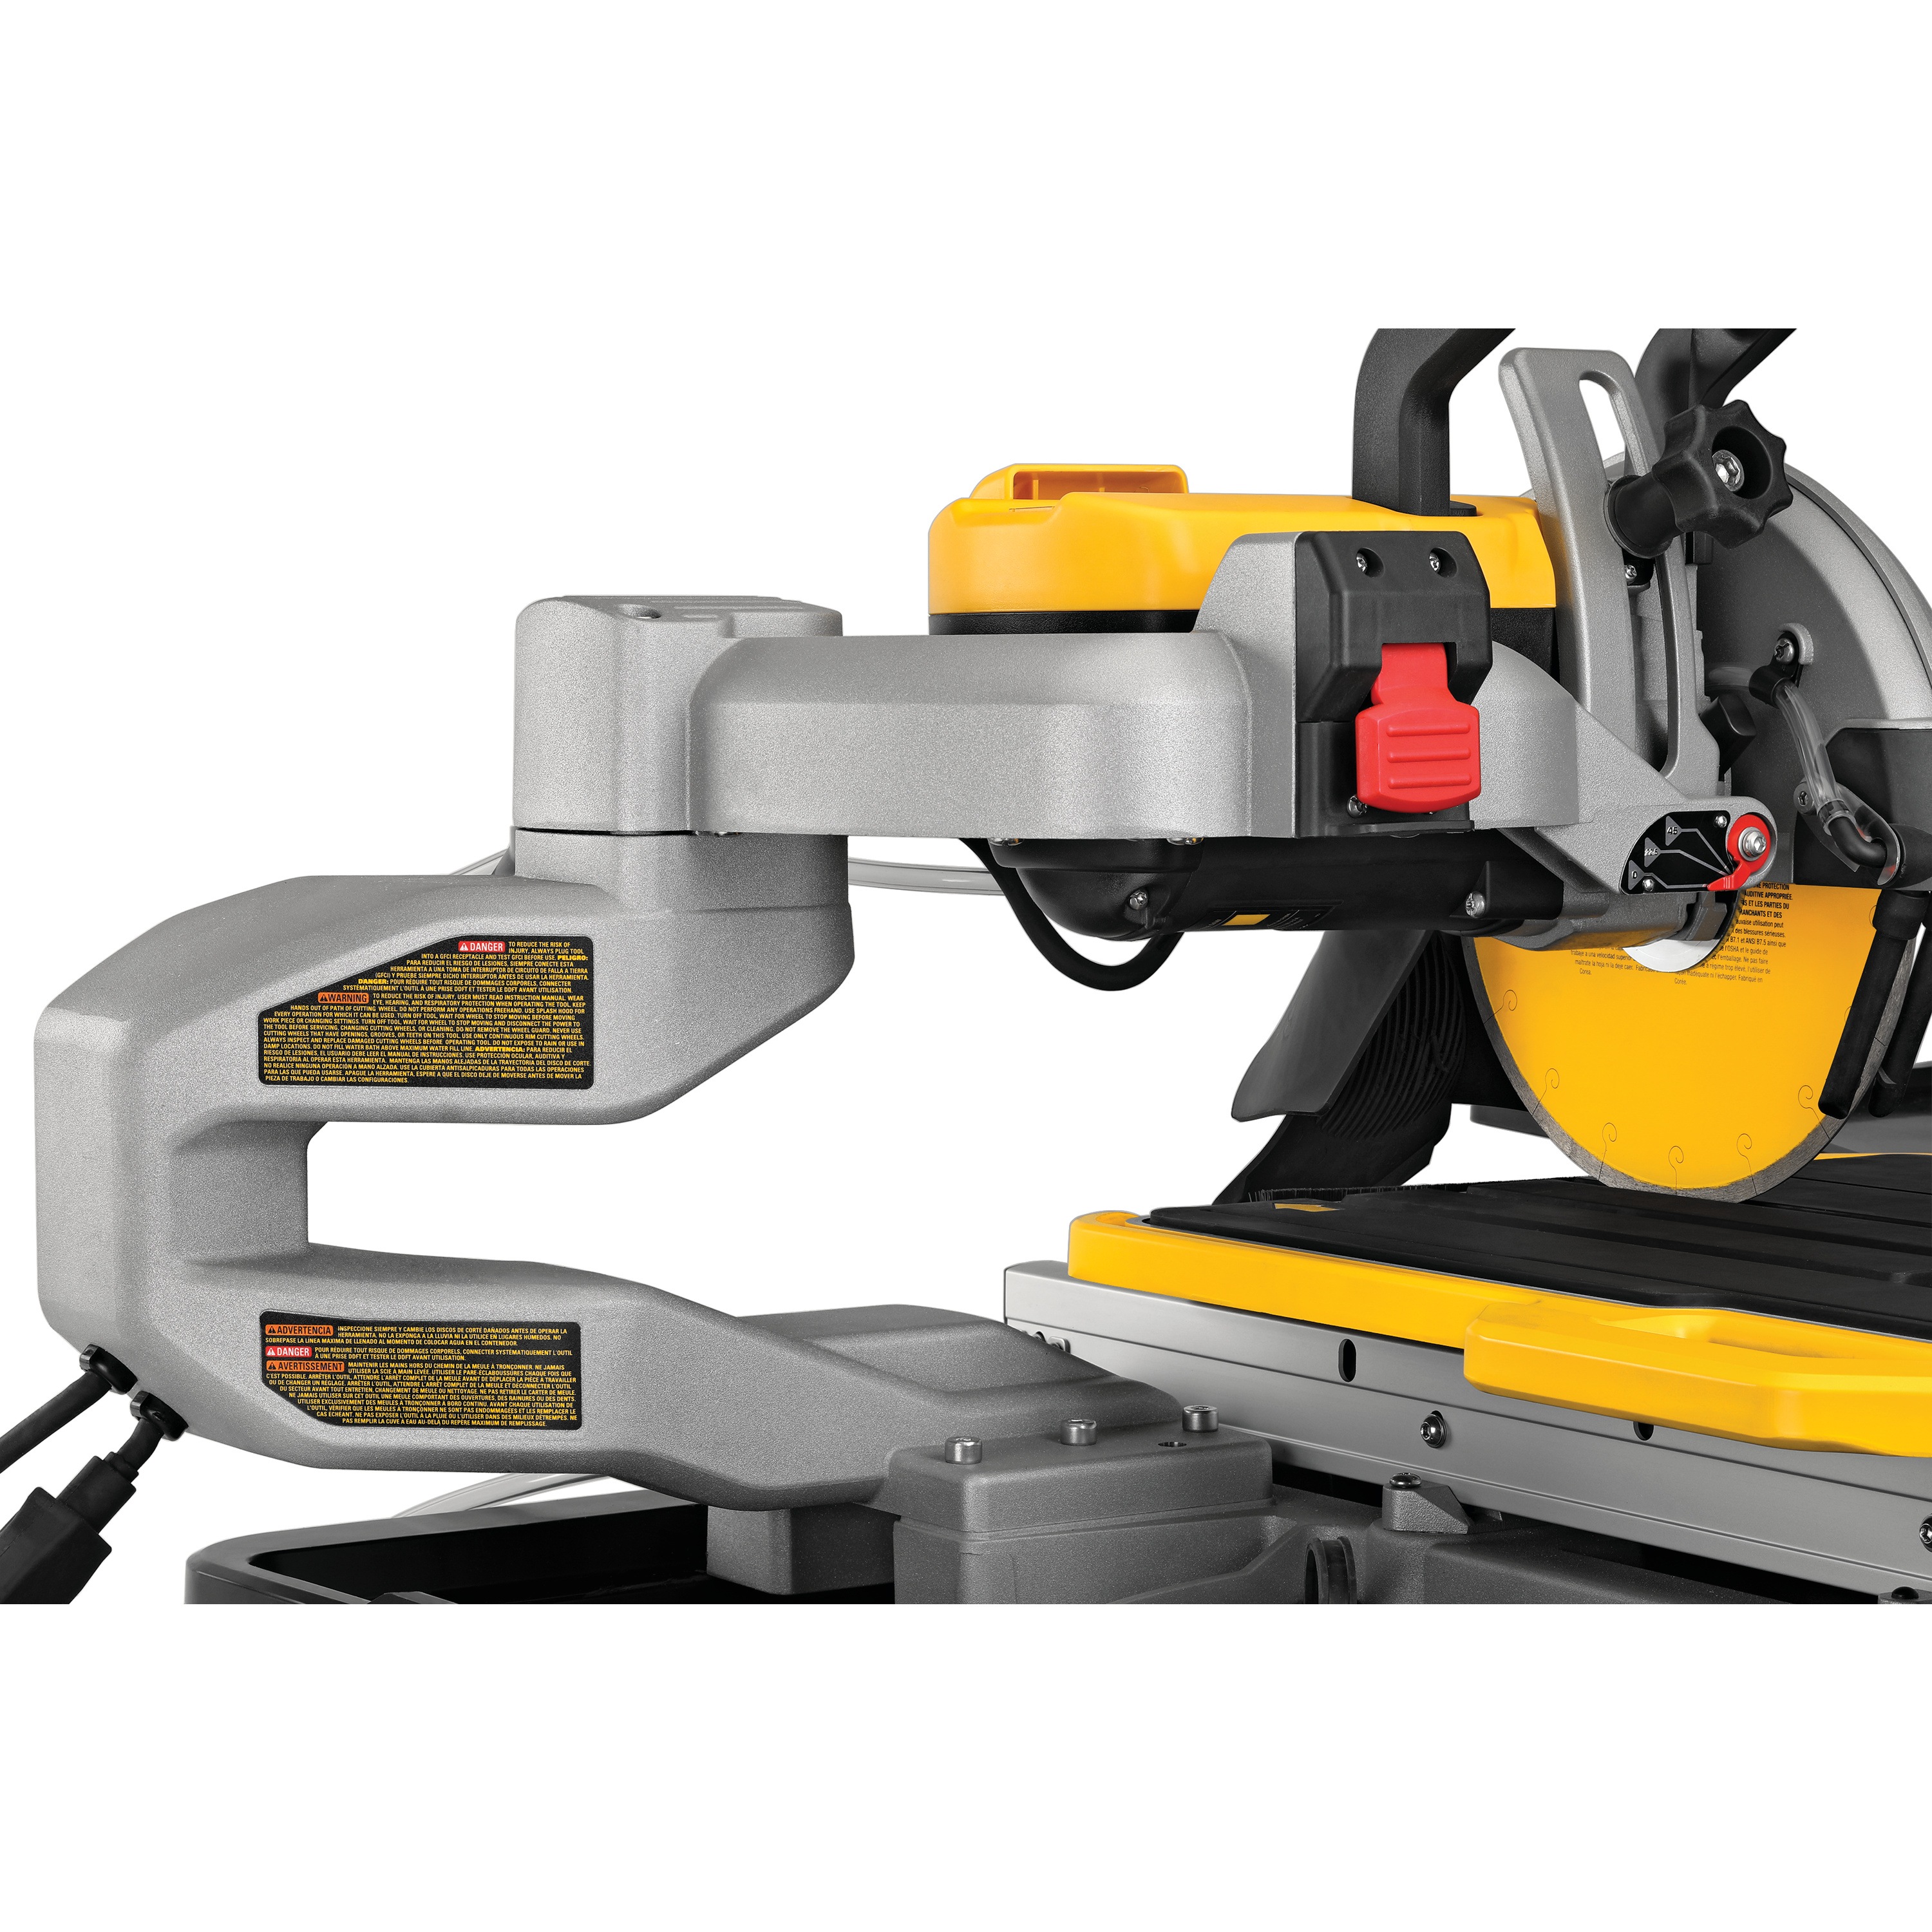 High Capacity Wet Tile Saw with its gage